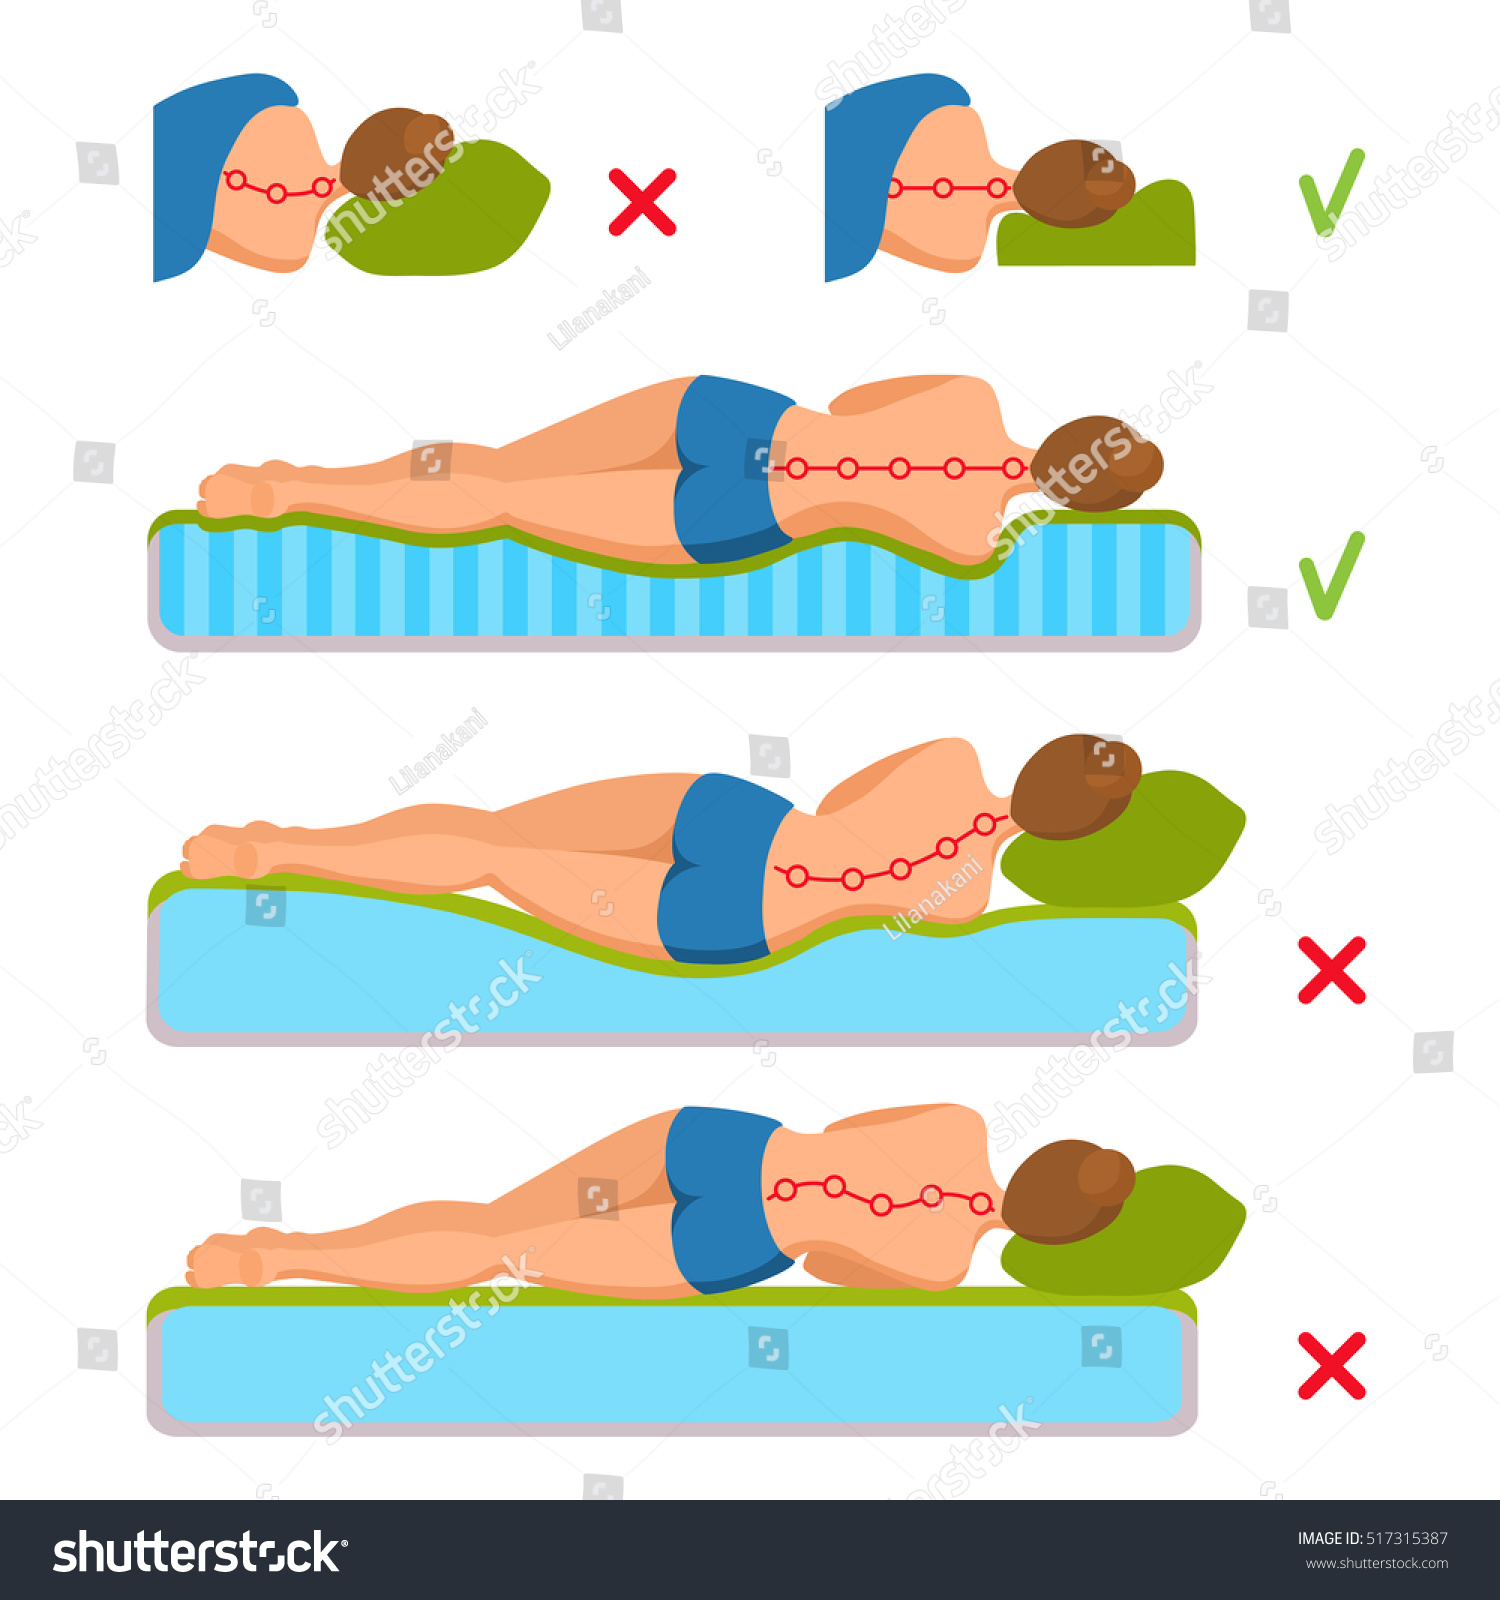 SVG of Correct and incorrect curvature of the spine in various mattresses. Orthopedic mattress and pillow. Woman lies on her side, seen from behind. Caring for health of back, neck. Comparative illustration. svg